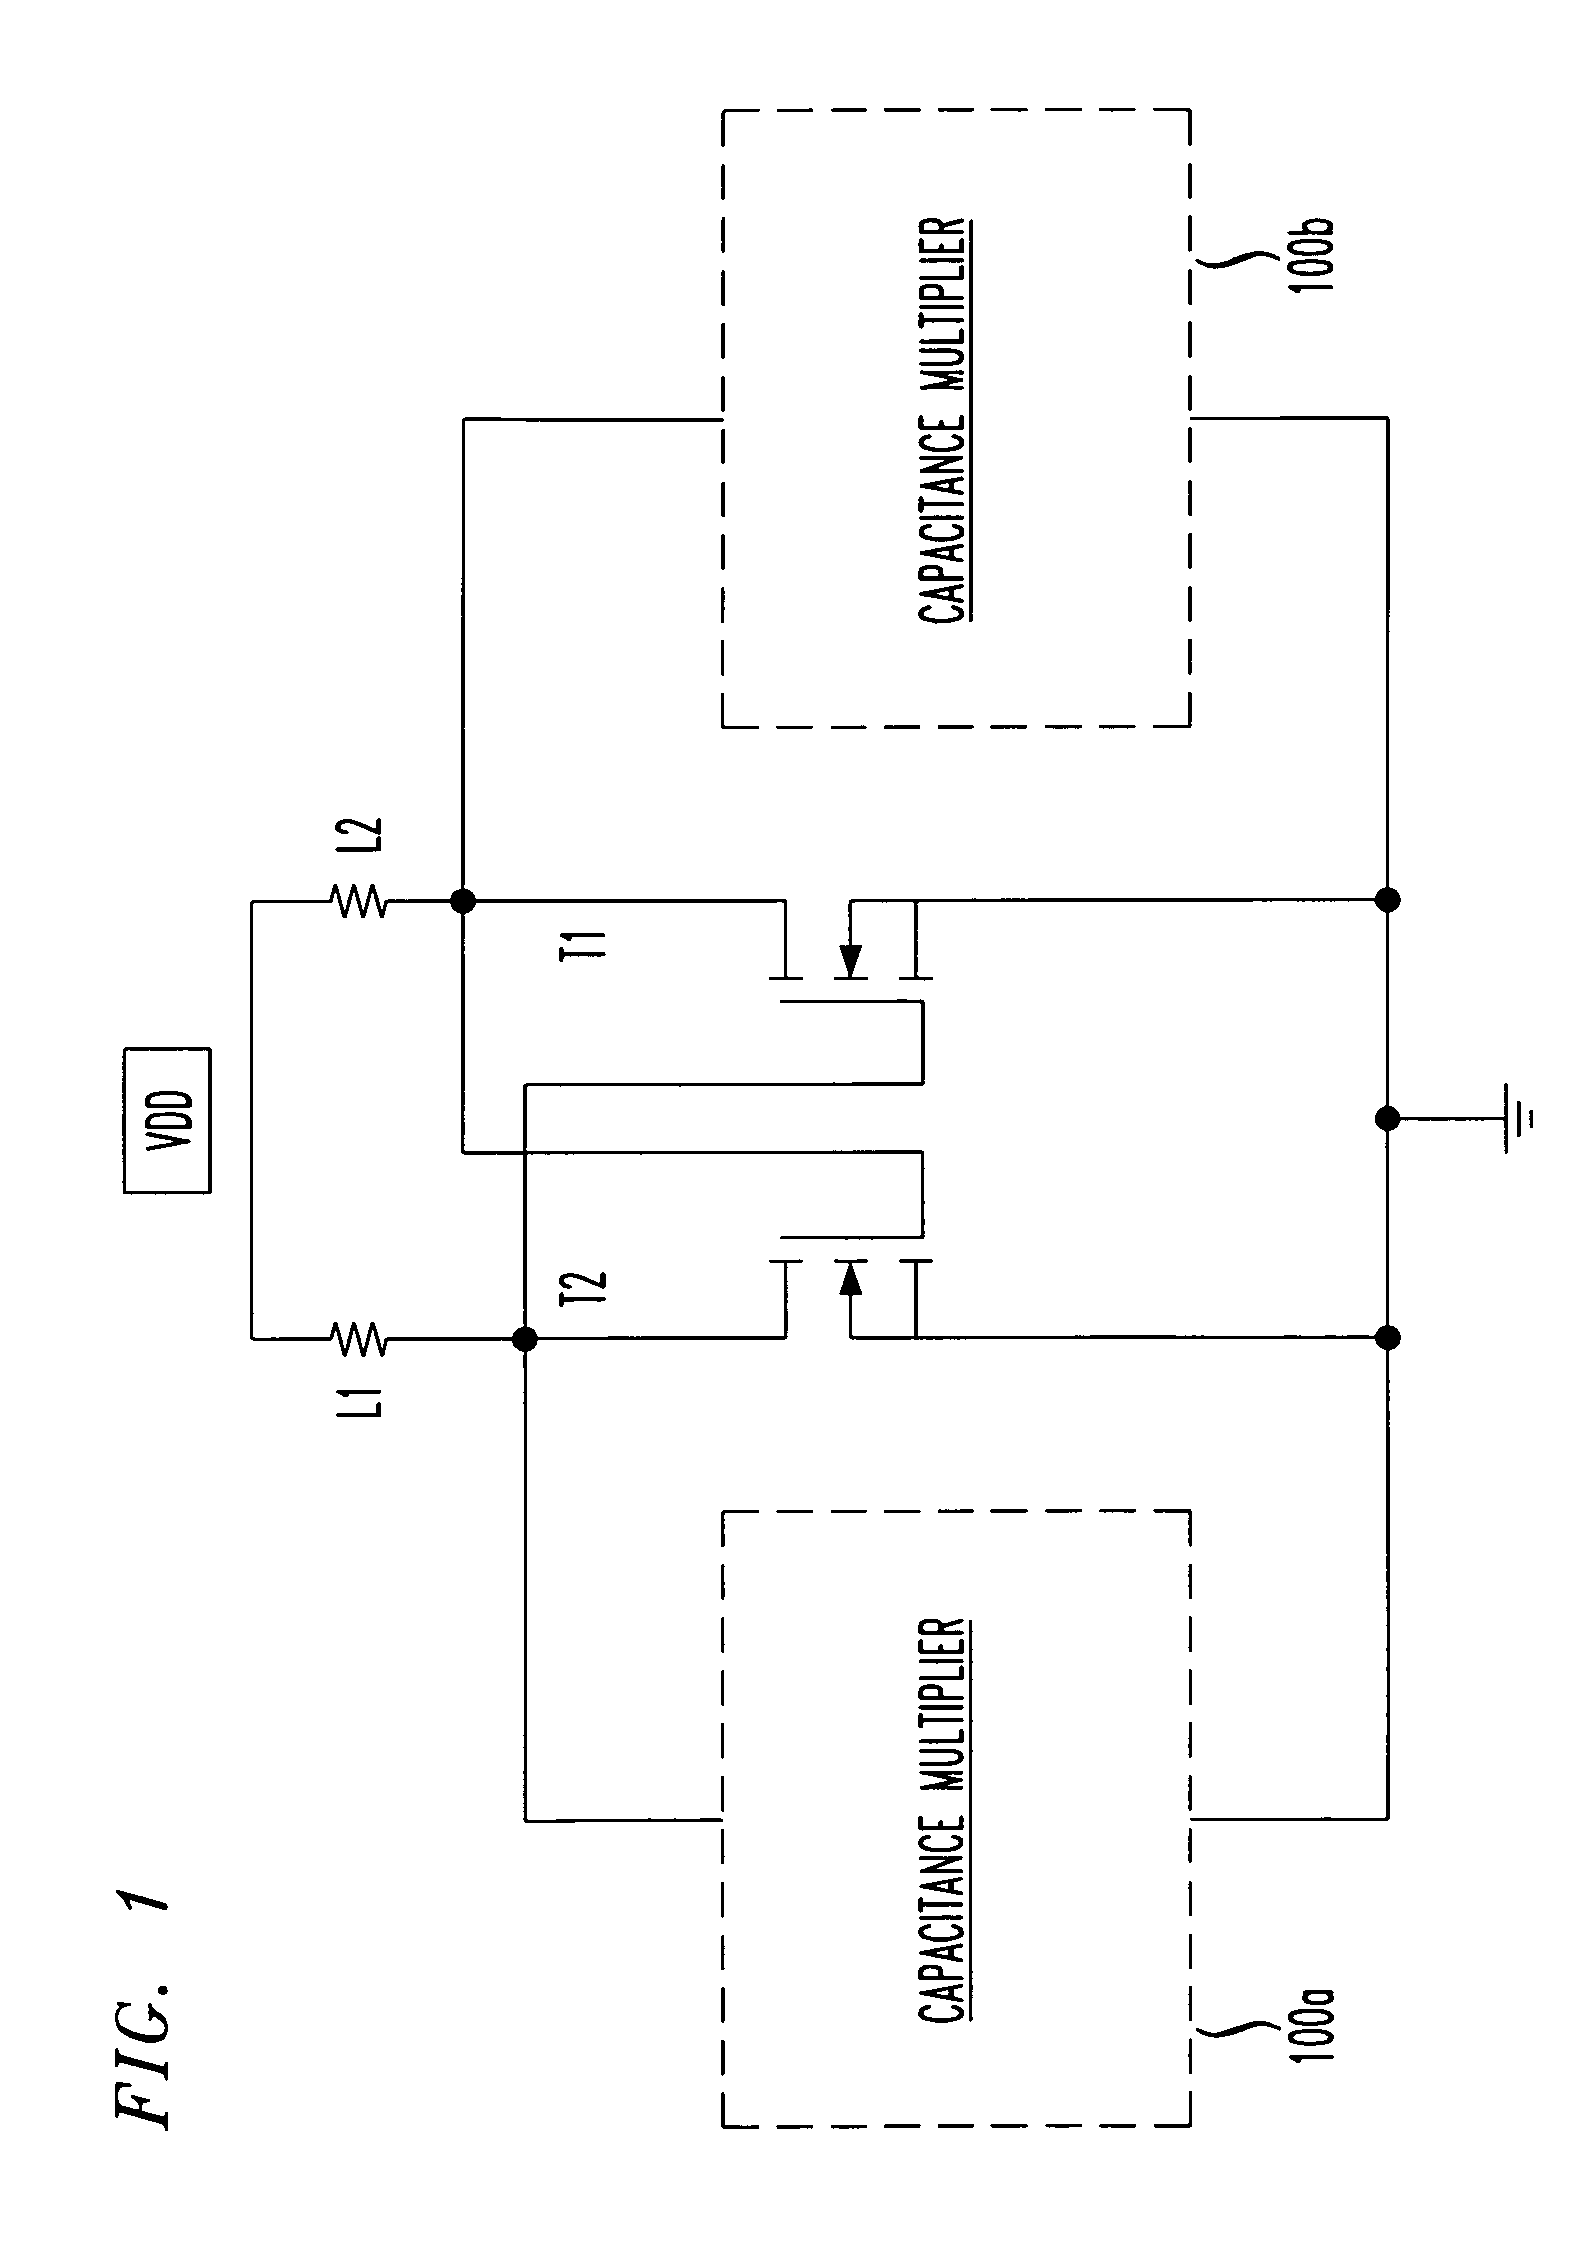 Frequency selection using capacitance multiplication